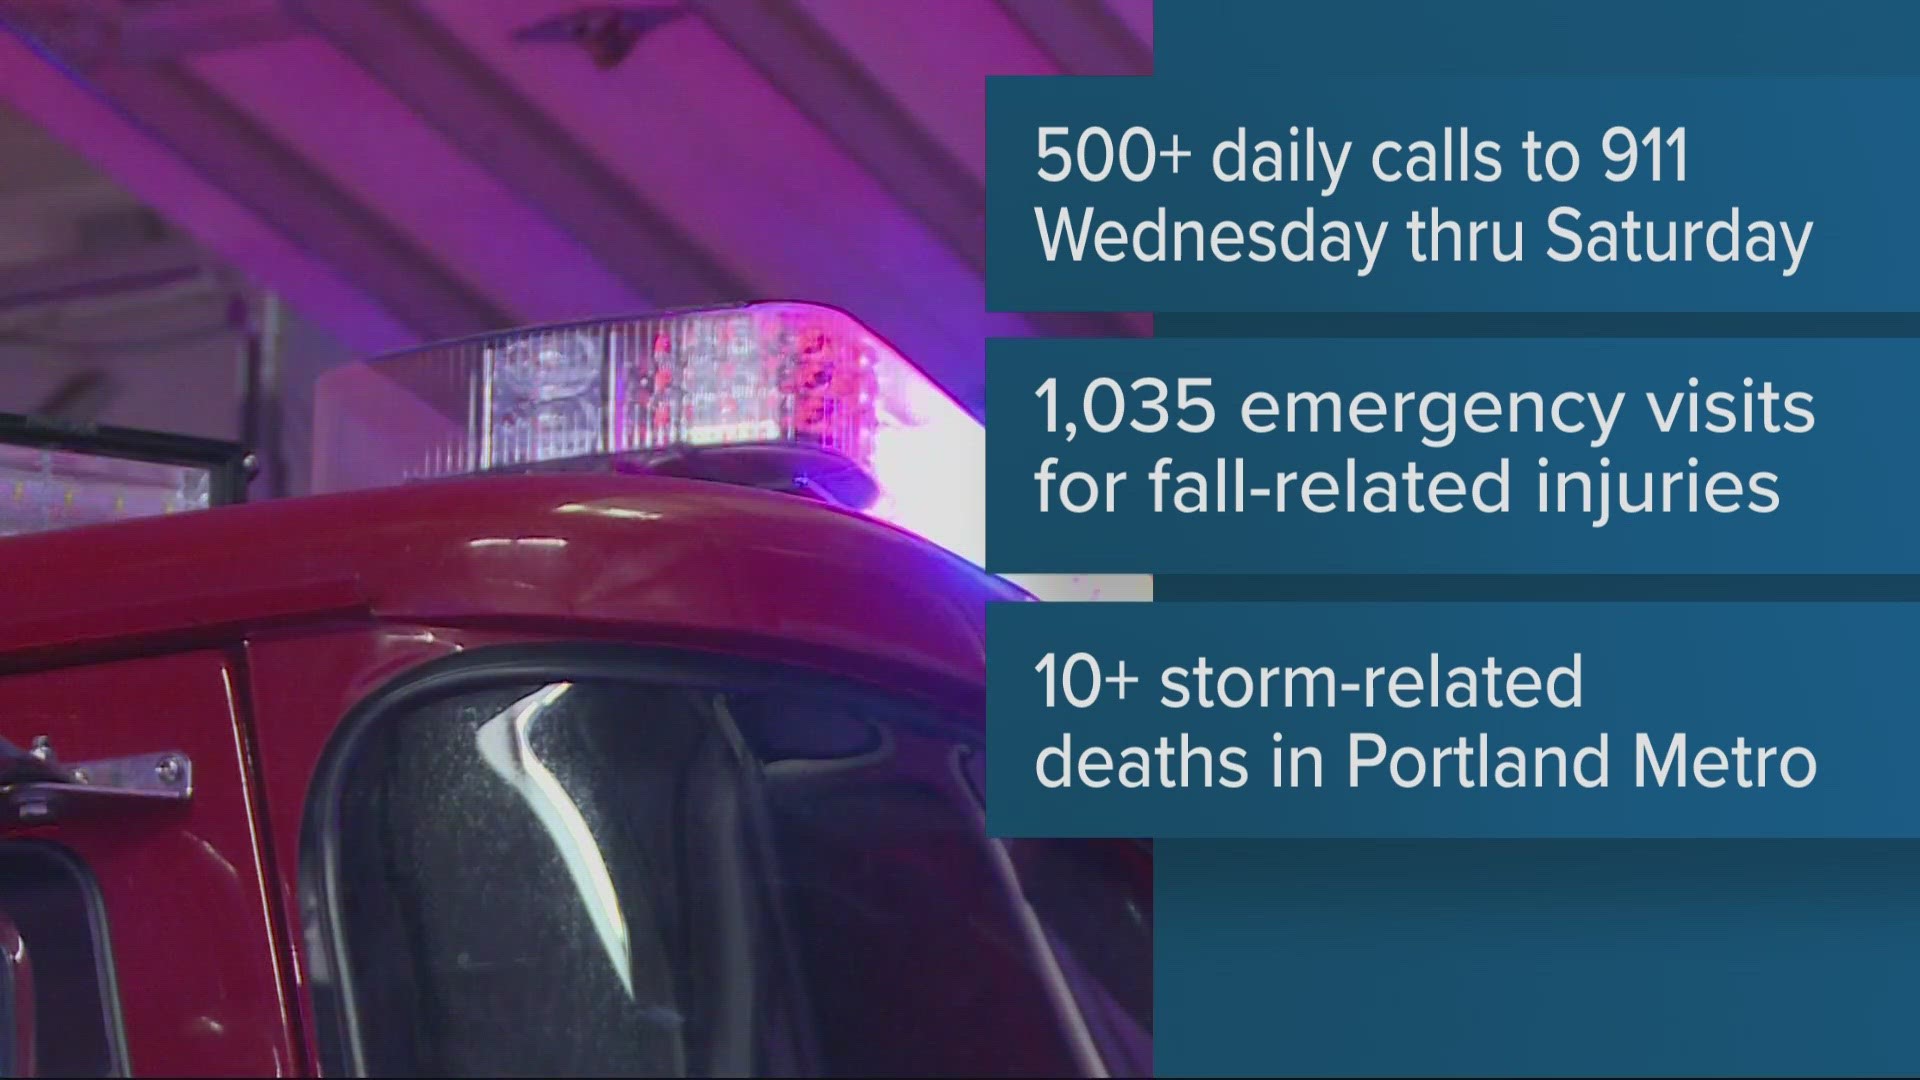 Over 500 emergency calls, 1,035 fall-related emergency visits and over 10 deaths stemming from storm in the metro area, according to Multnomah County.